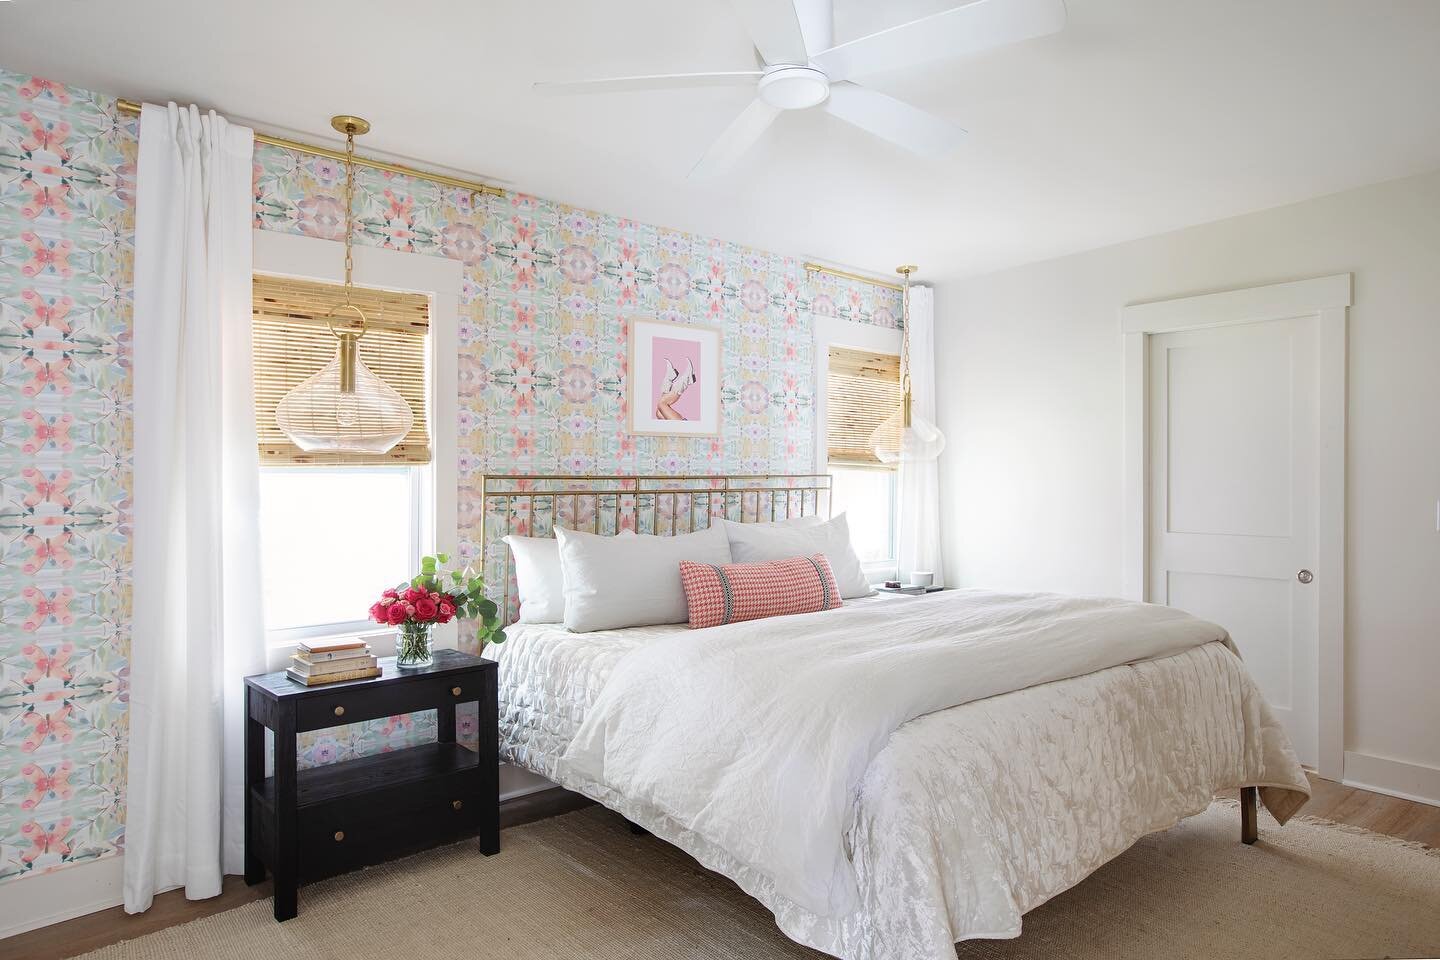 Girls just want to have fun 🎶 - 
You got that right, Cindy L. 
#houseofhoffmanninteriors 
#designwithcolor #fundesign #eclecticdecor #housebeautiful #mydomaine #thenewsouthern #charlestondesigner #interiordesign #masterbedroom #masterbedroomdecor #s